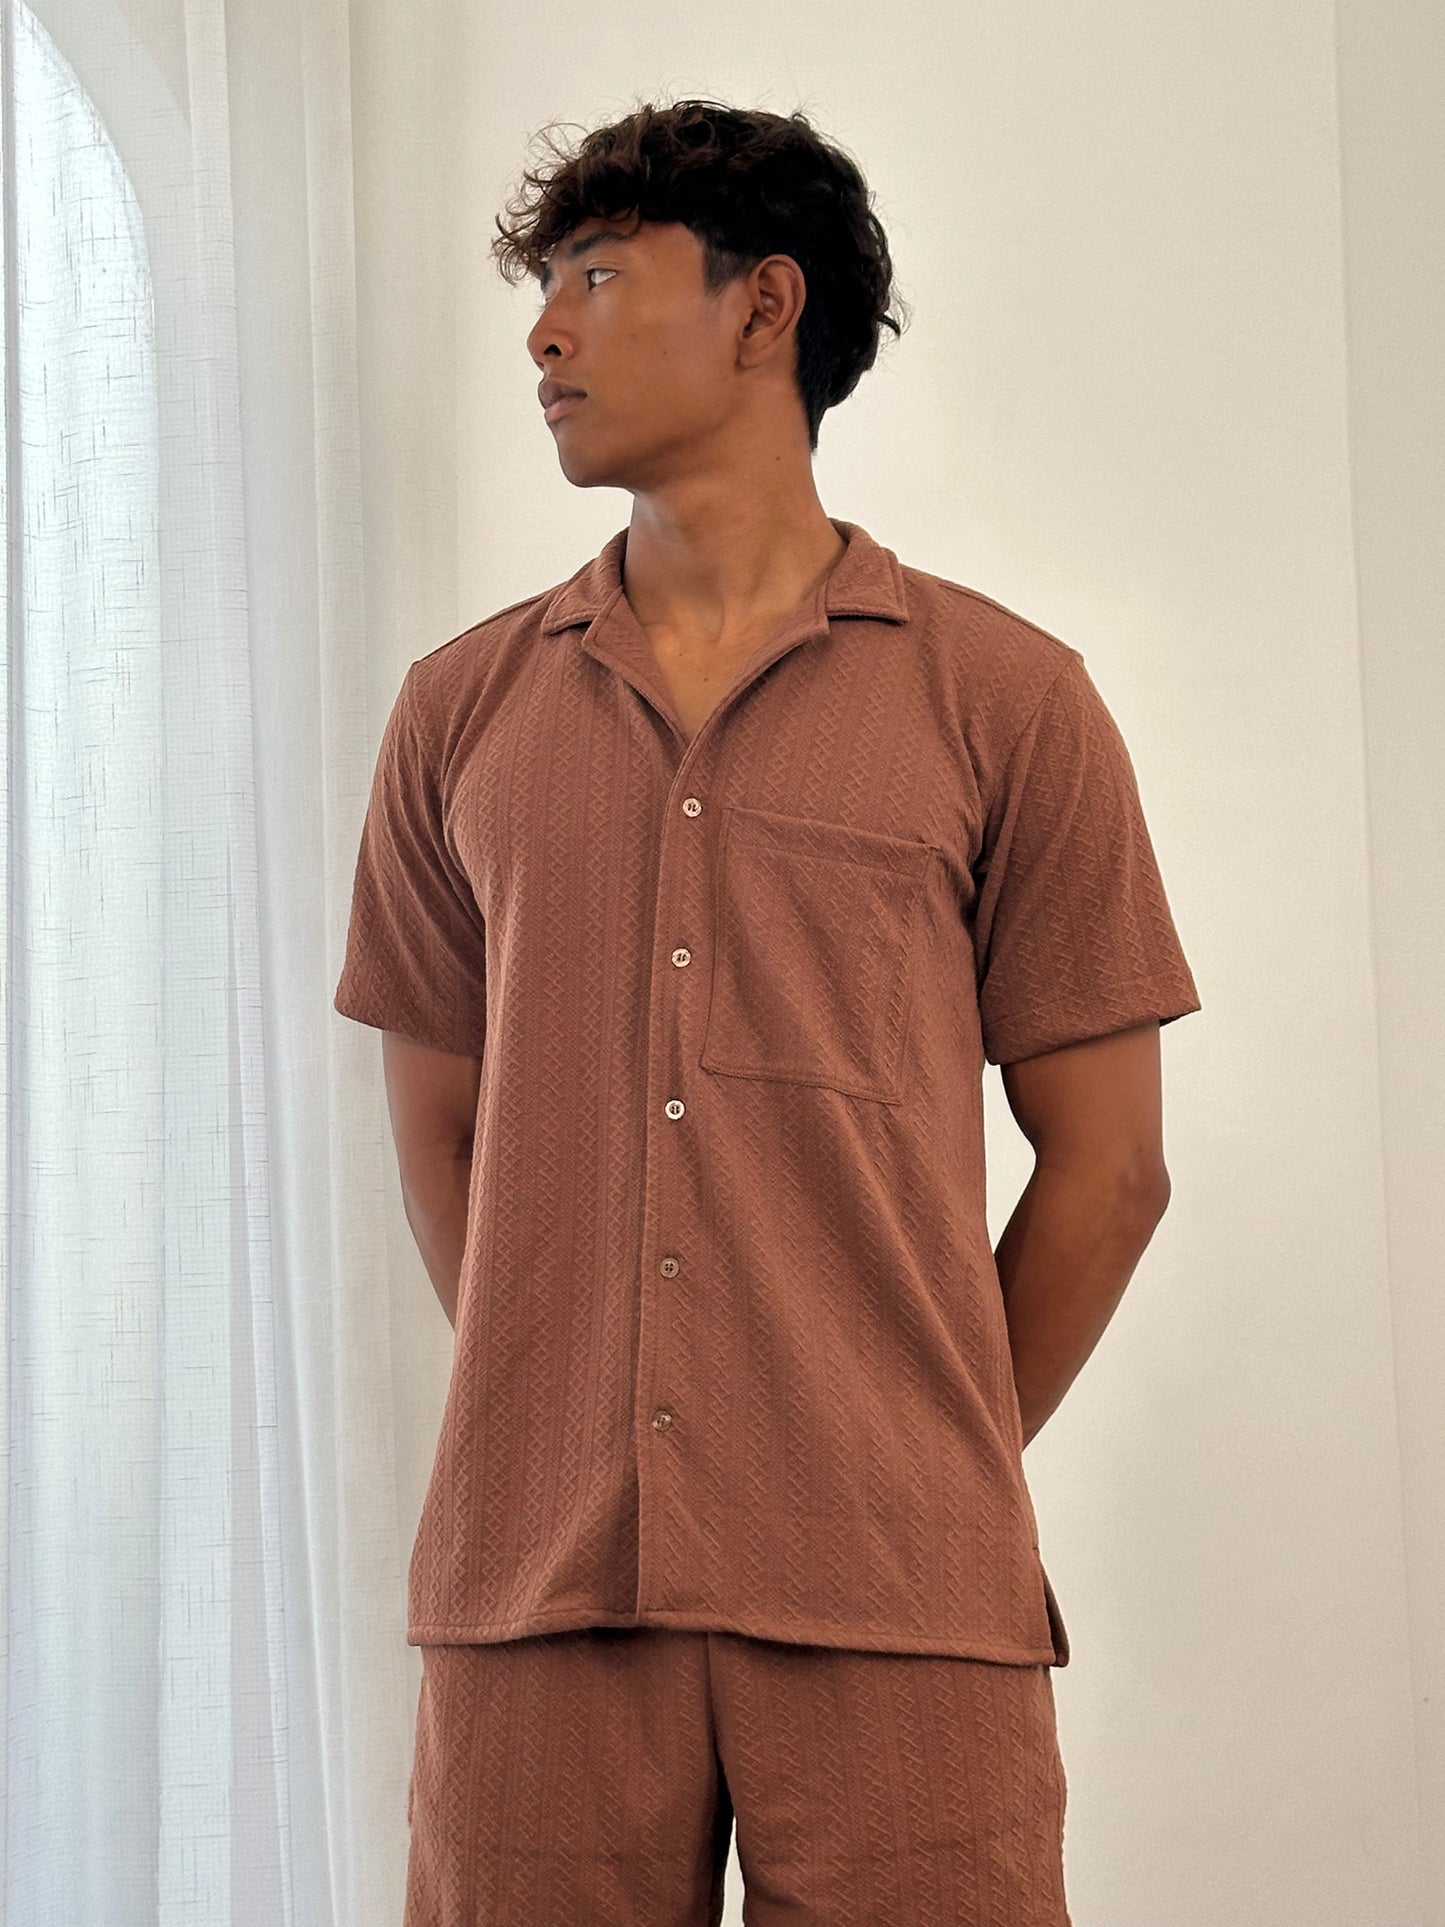 Lembongan Knitted Shirt by Cottonello - Men's Knitted Shirt Short Sleeve